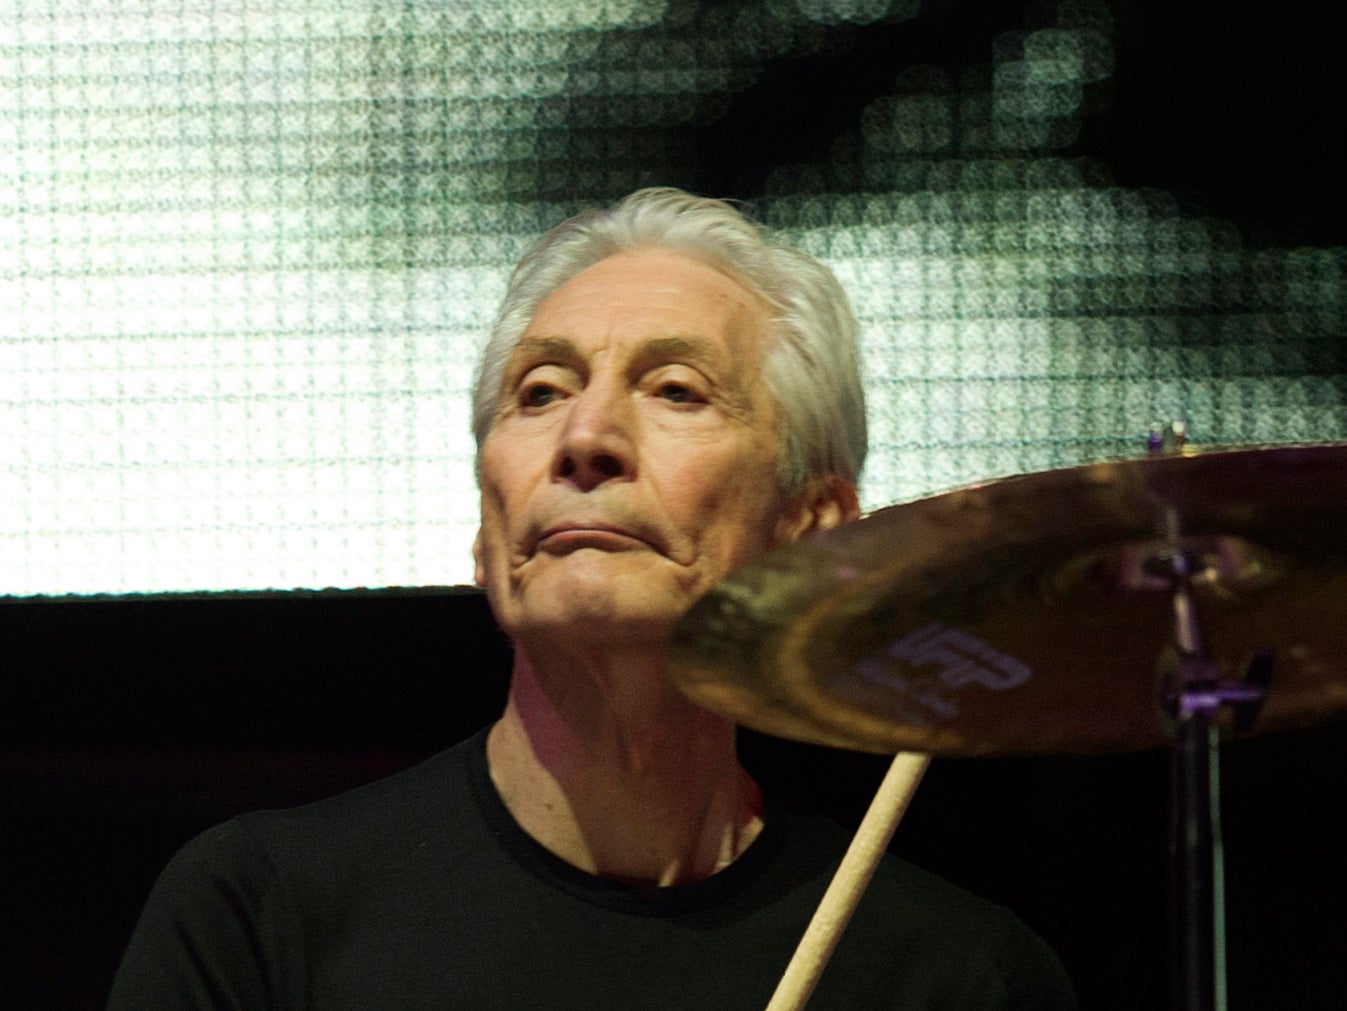 Sir Elton John, Paul McCartney and Ringo Starr were among the stars to pay tribute to Charlie Watts